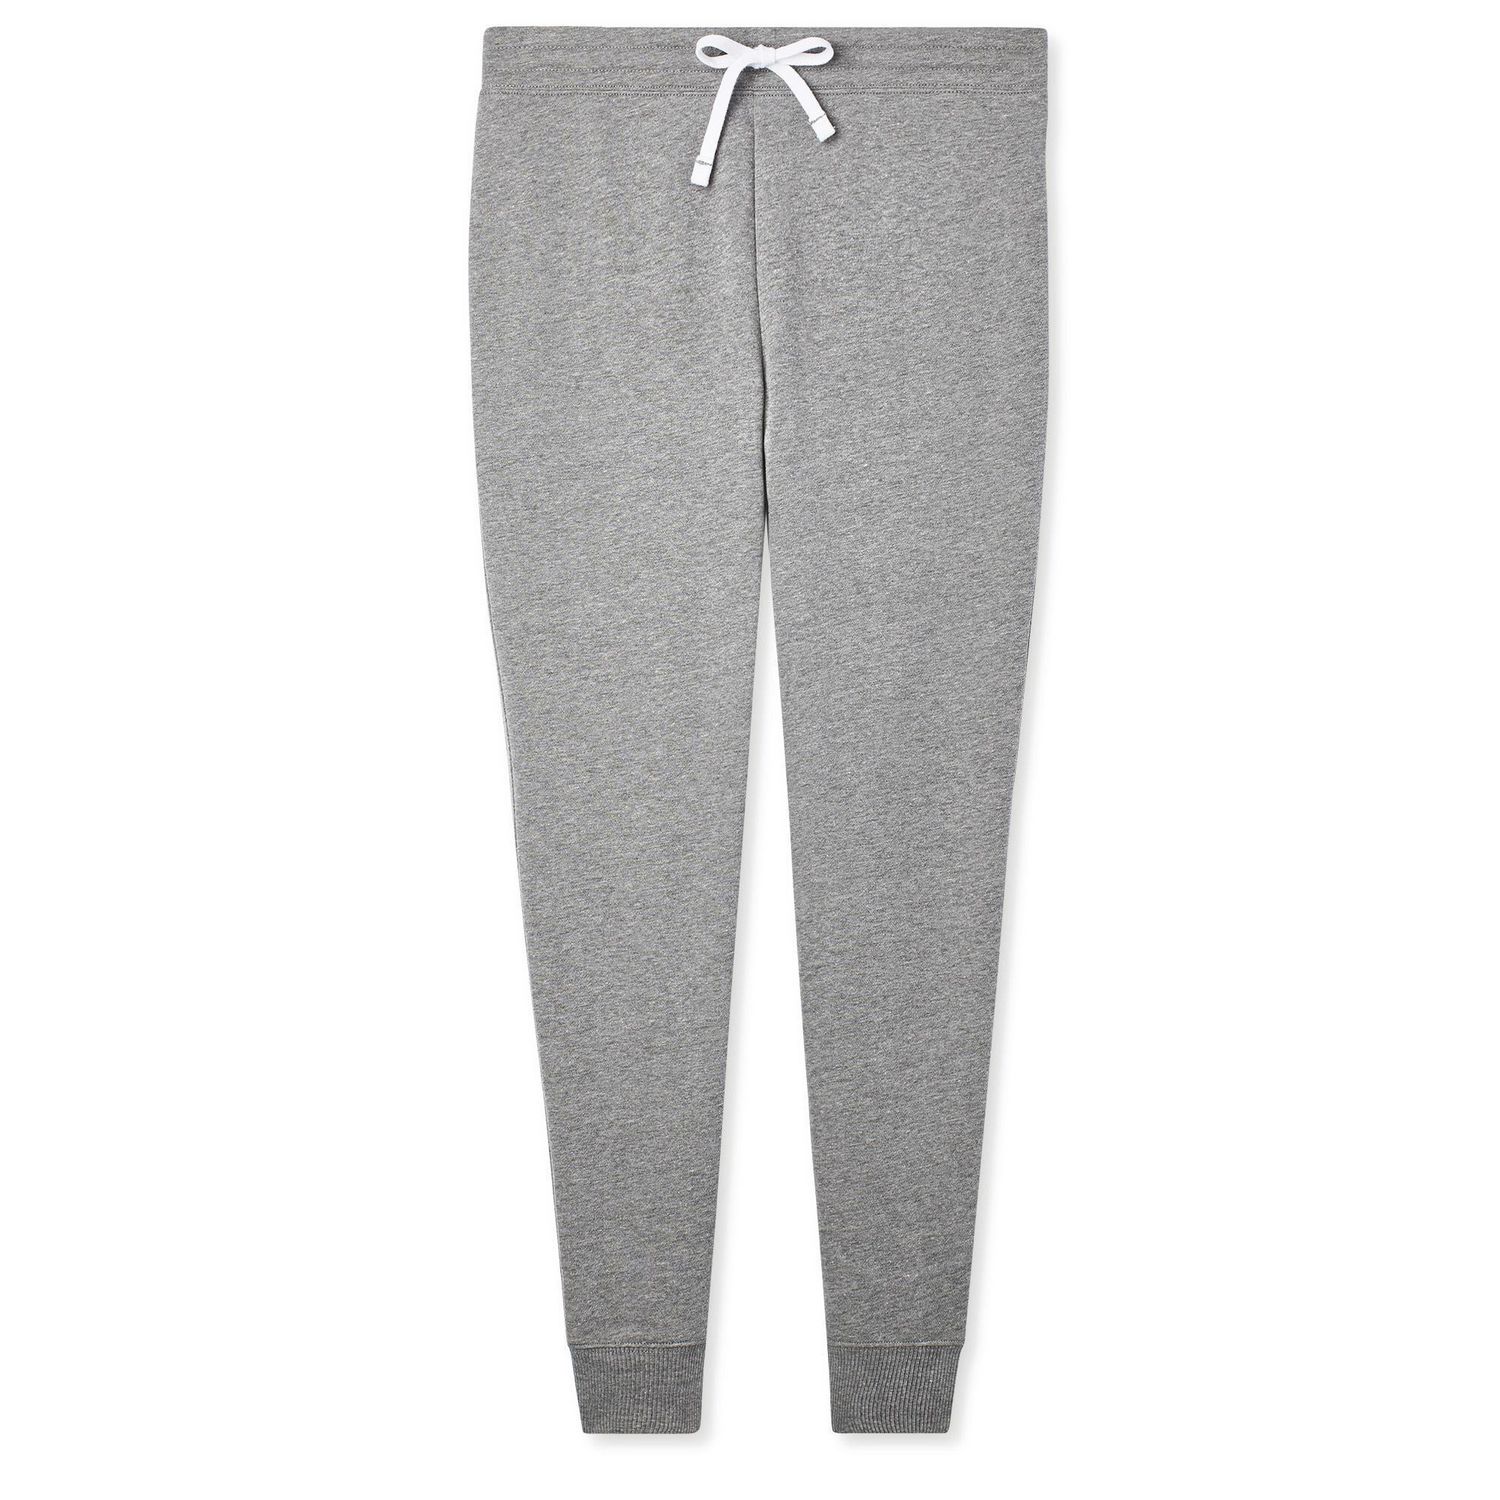 Buy ALL Plus Size Women Charcoal Grey Solid 3/4th Length Track Pants -  Track Pants for Women 6787571